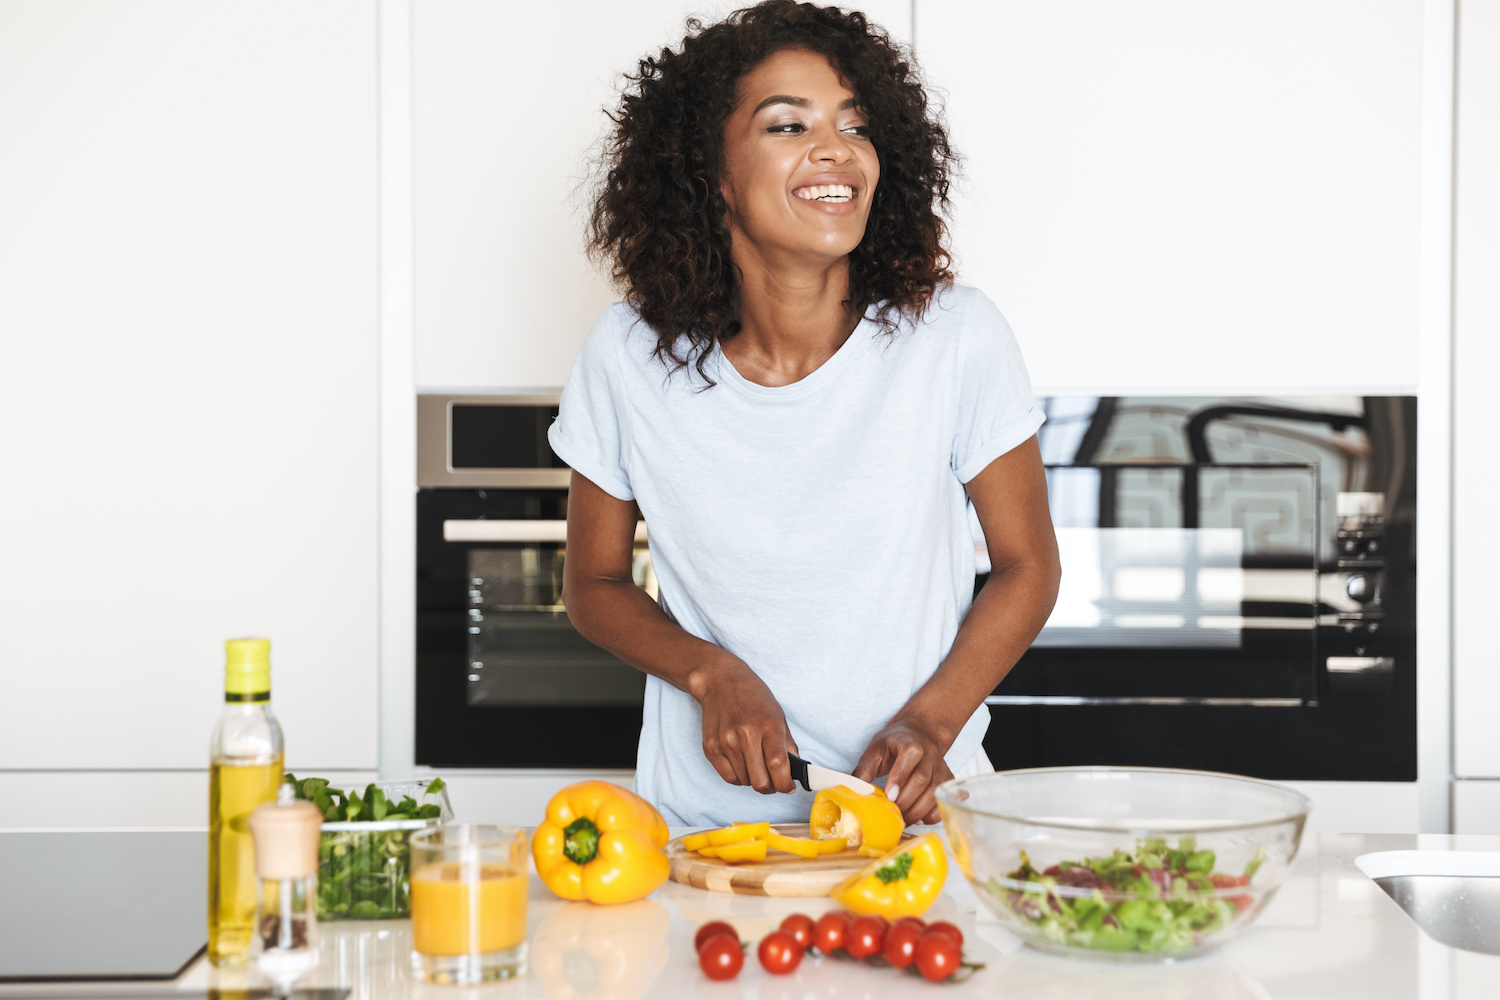 laughing woman preparing healthy food in her kitchen